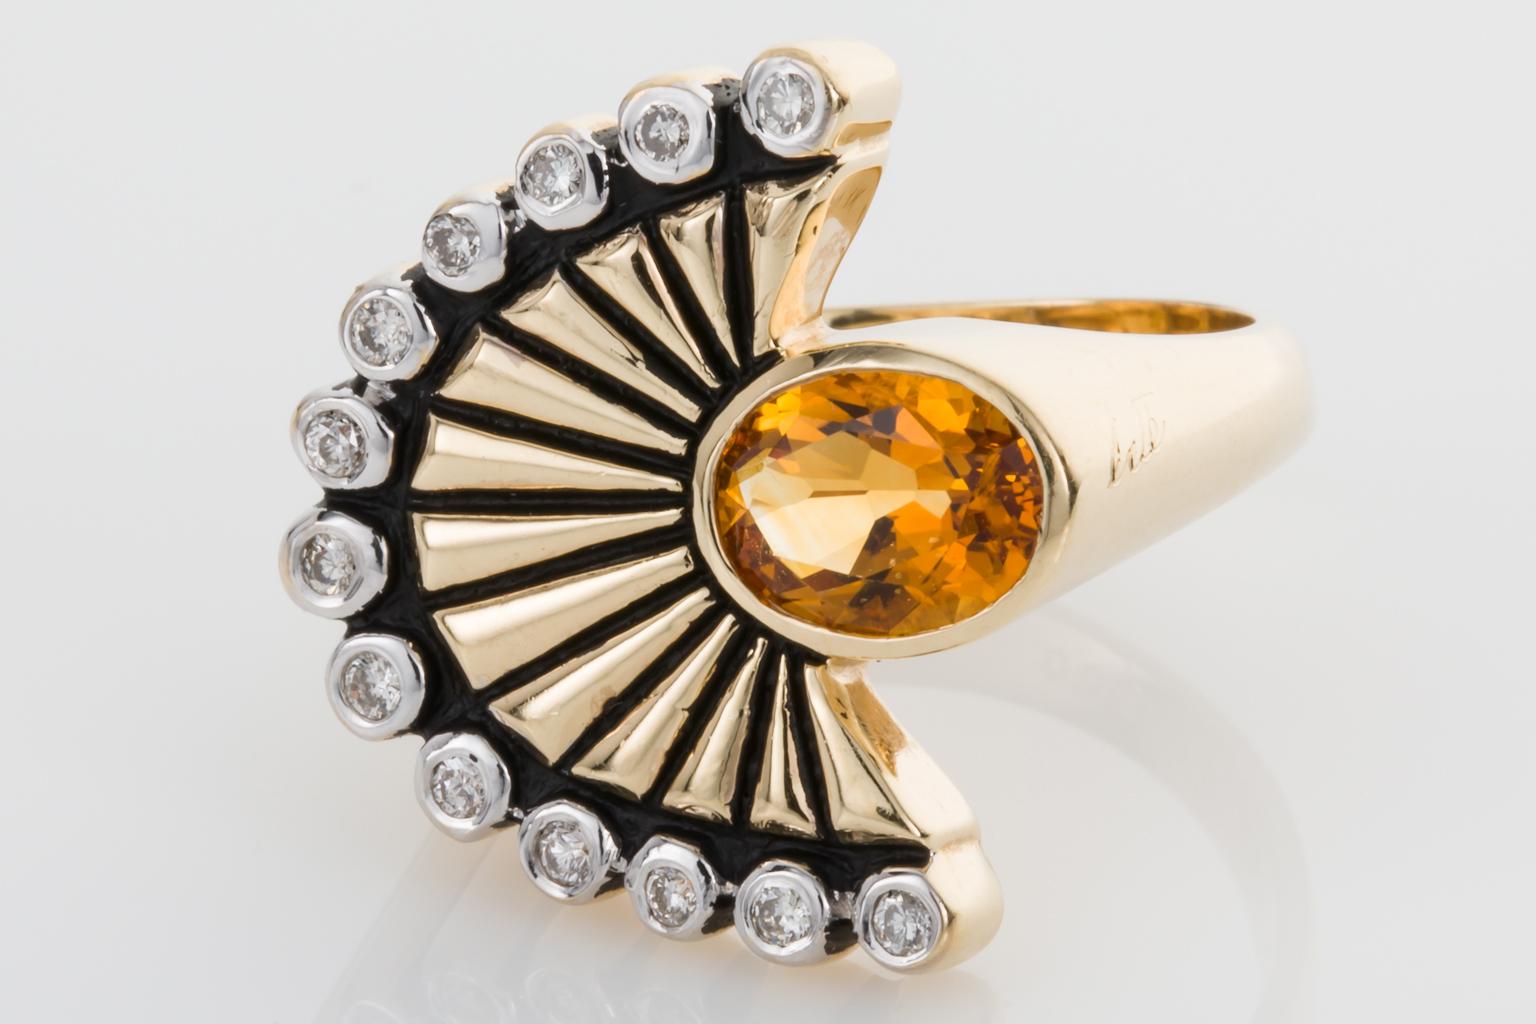 Looking for a standout piece of jewellery to add to your collection, look no further than this classic Erte 'La Mer' citrine & diamond ring in 14kt yellow gold, featuring an oval citrine accented by 13 round cut diamonds with a total weight of